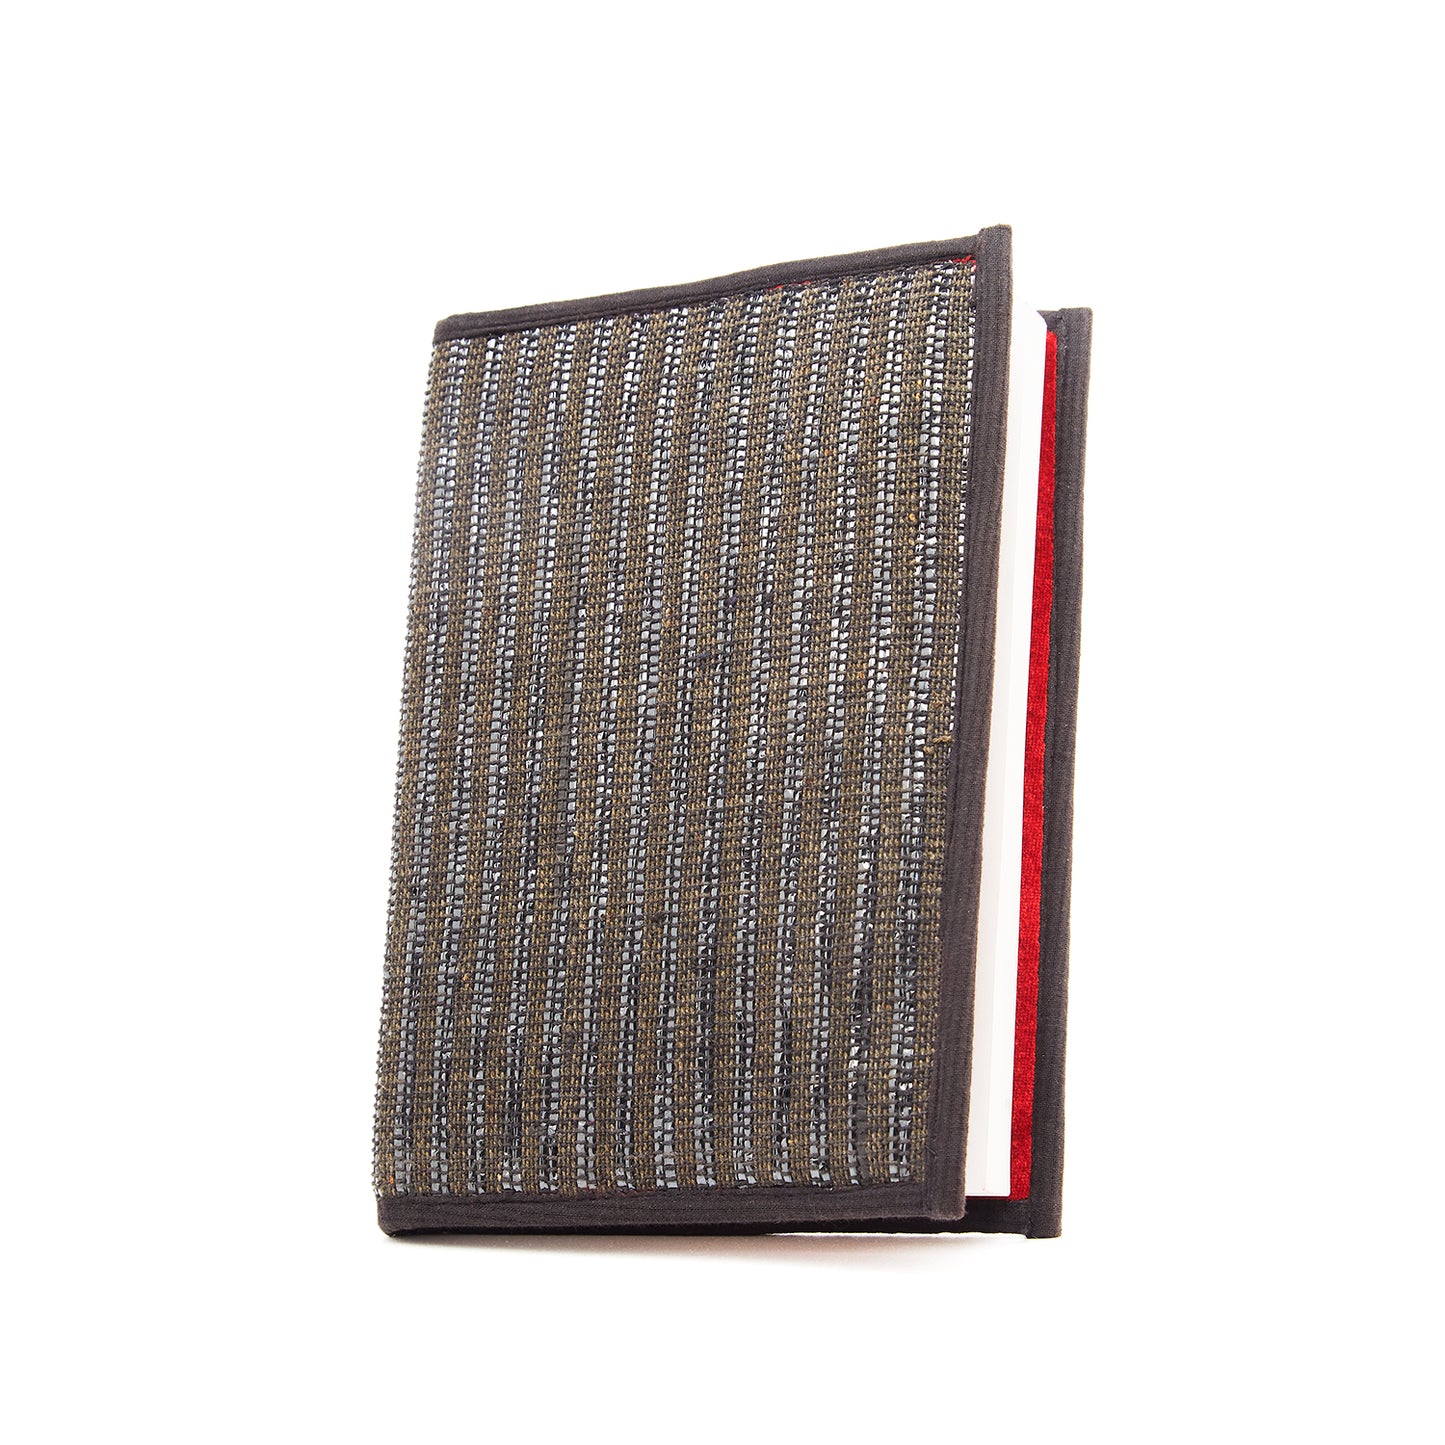 Charcoal Black Color - Diary with reusable cover made of Waste Fabric (with Ari Work)